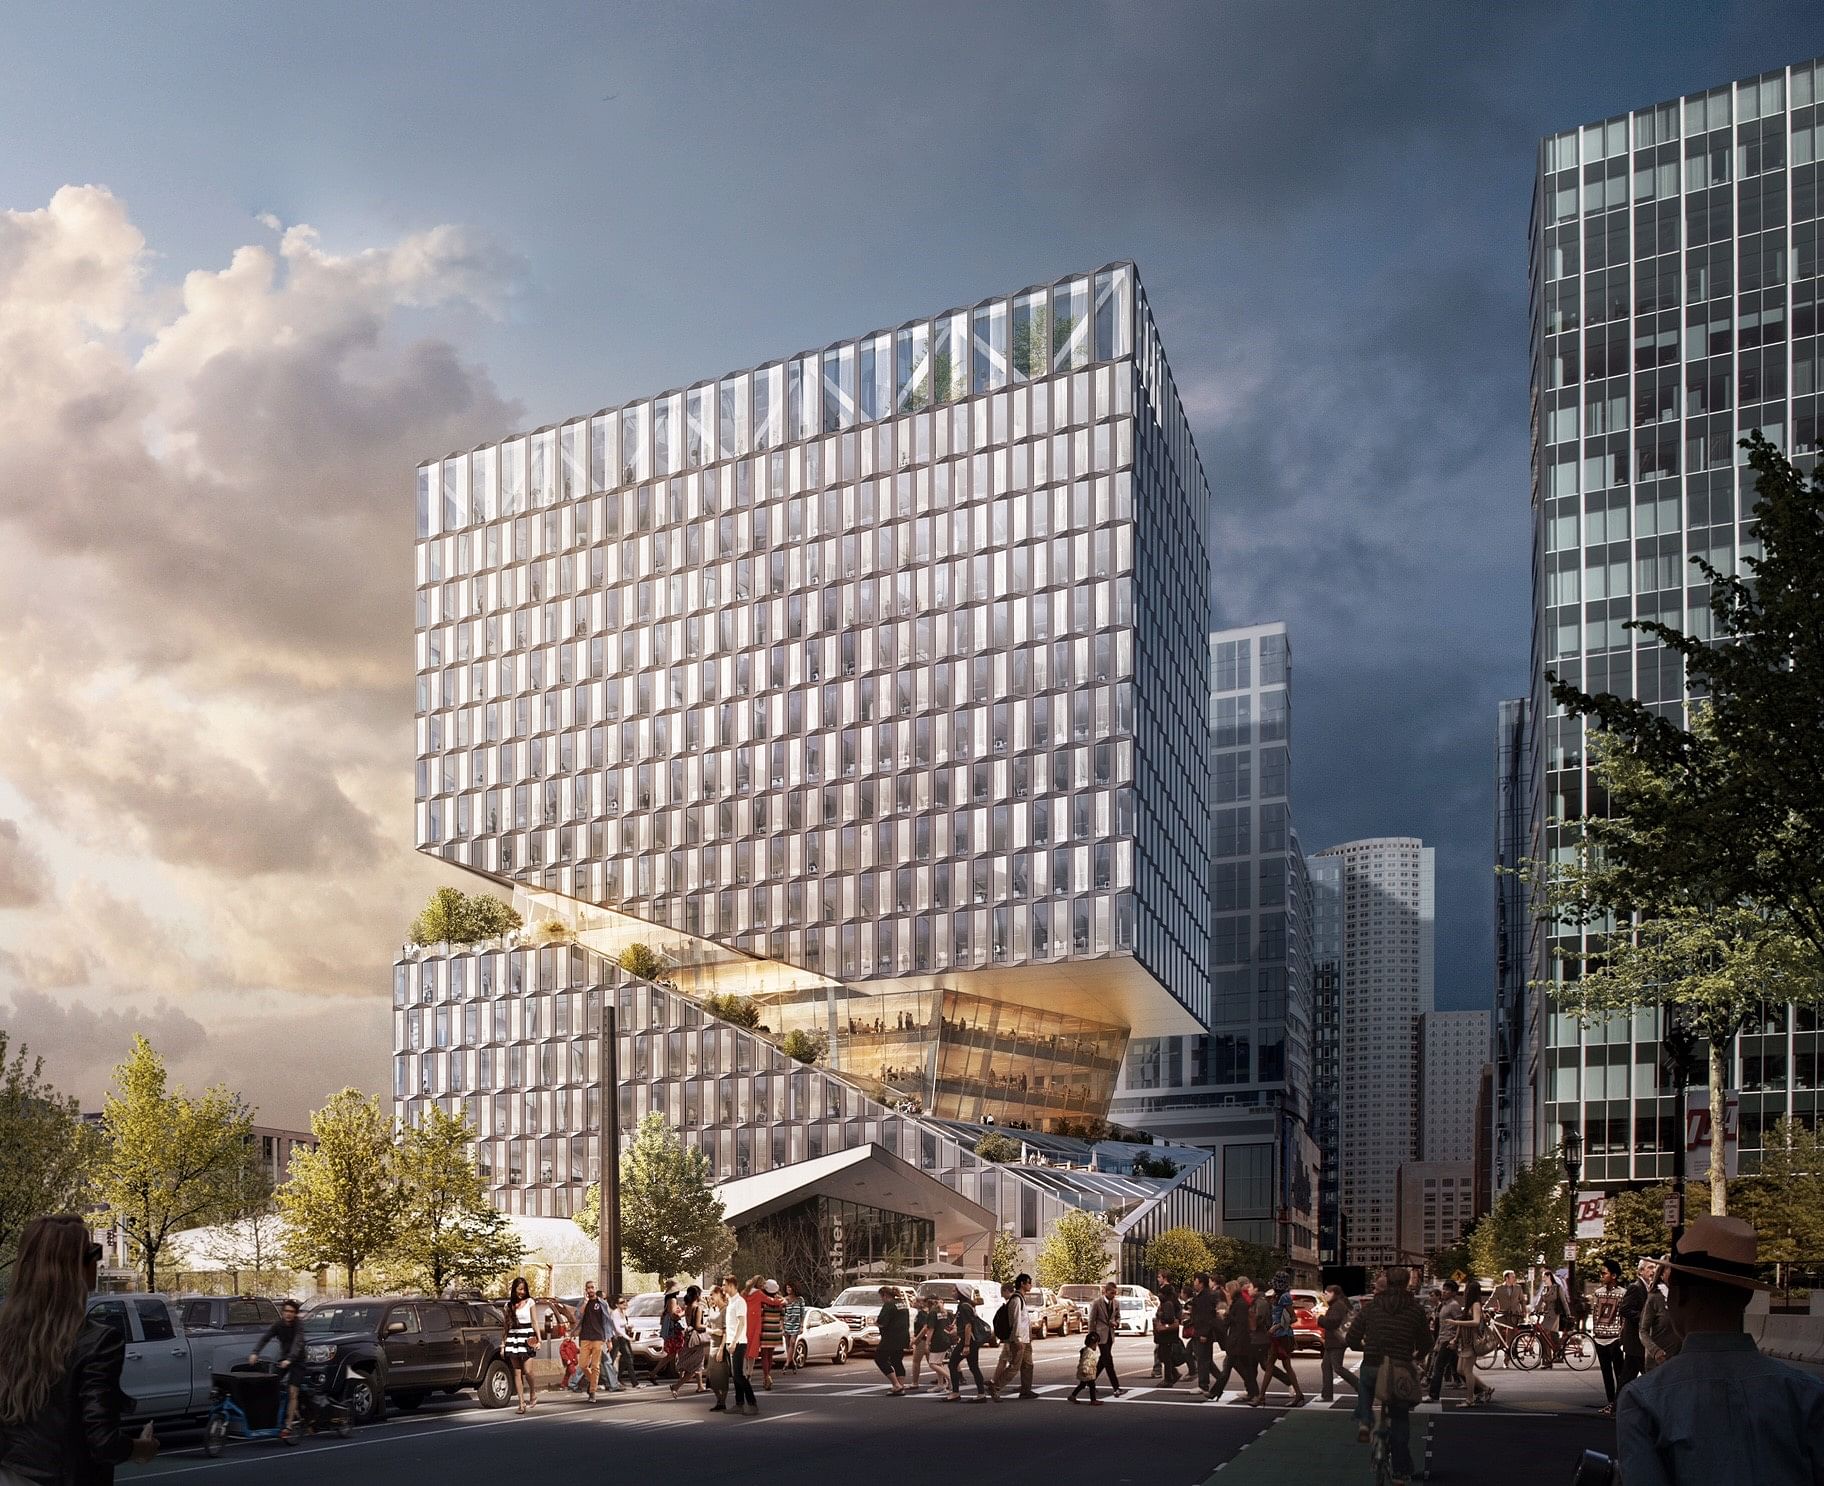 OMA embarks on first Boston commission with 88 Seaport mixed-use 